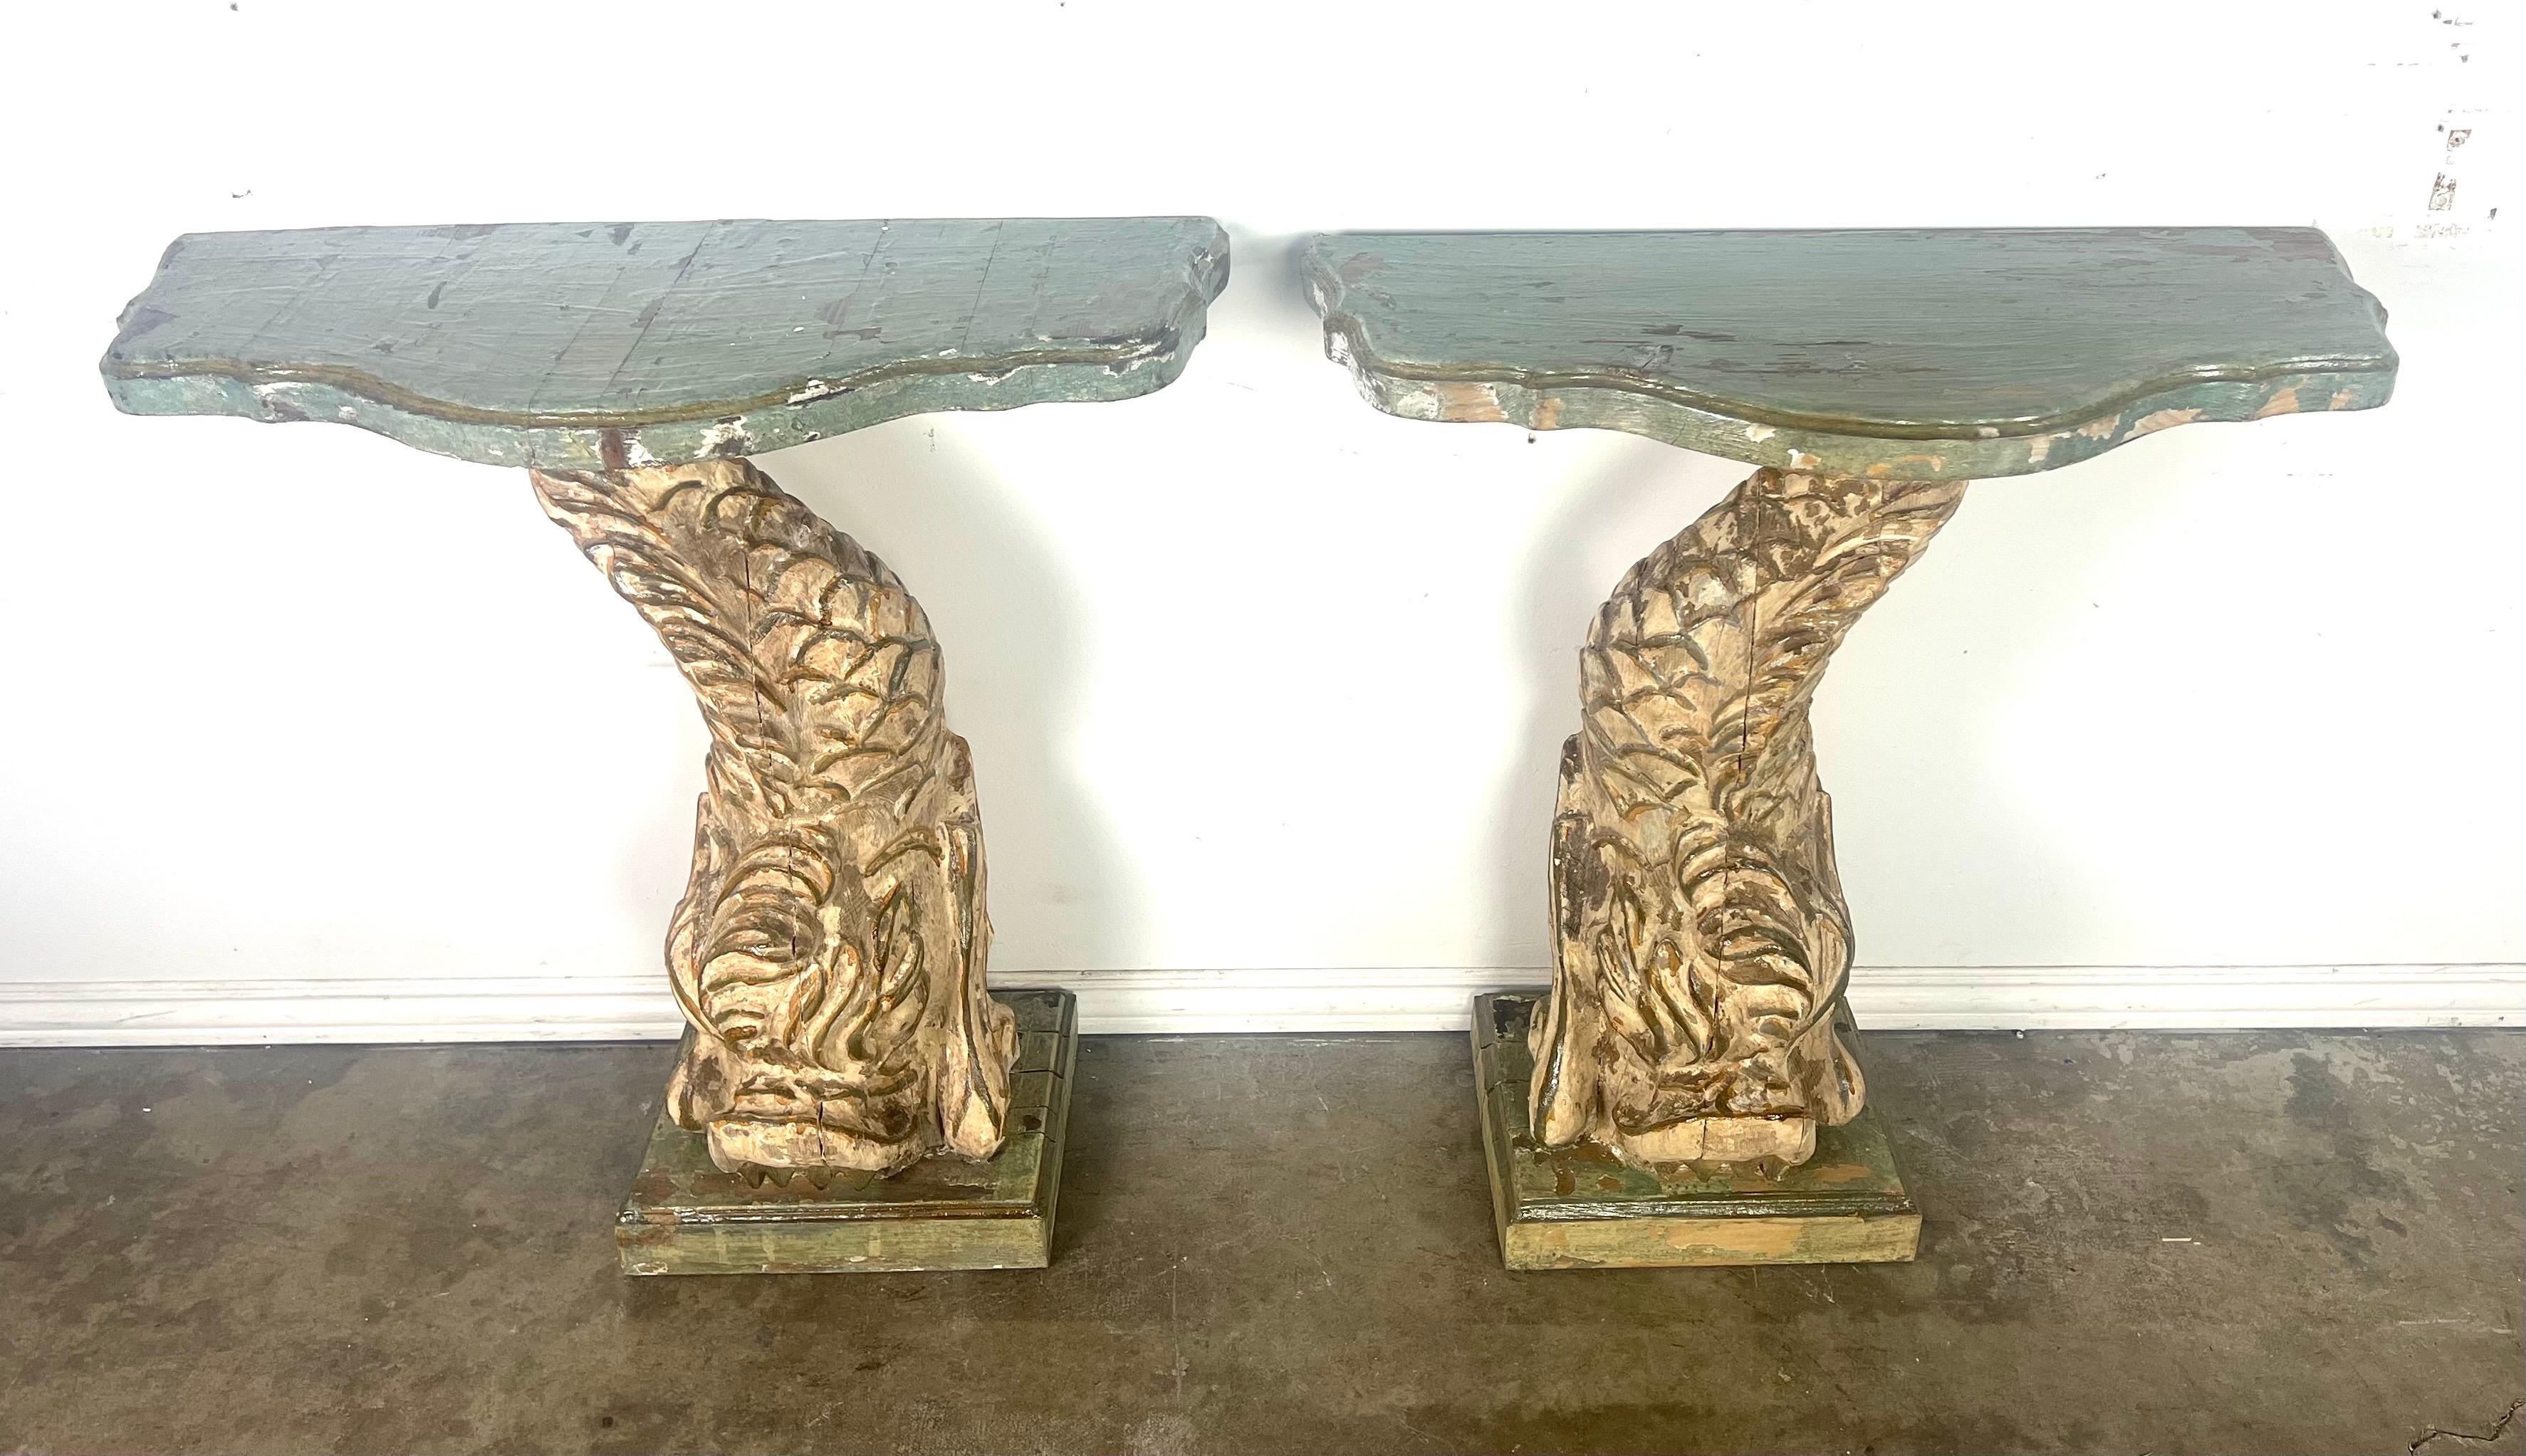 These consoles feature an intriguing and distinctive design, each supported by a sculpted base resembling a large, stylized fish or mythical sea creature, complete with scales and swirling patterns.

The bases are distressed, which adds to their